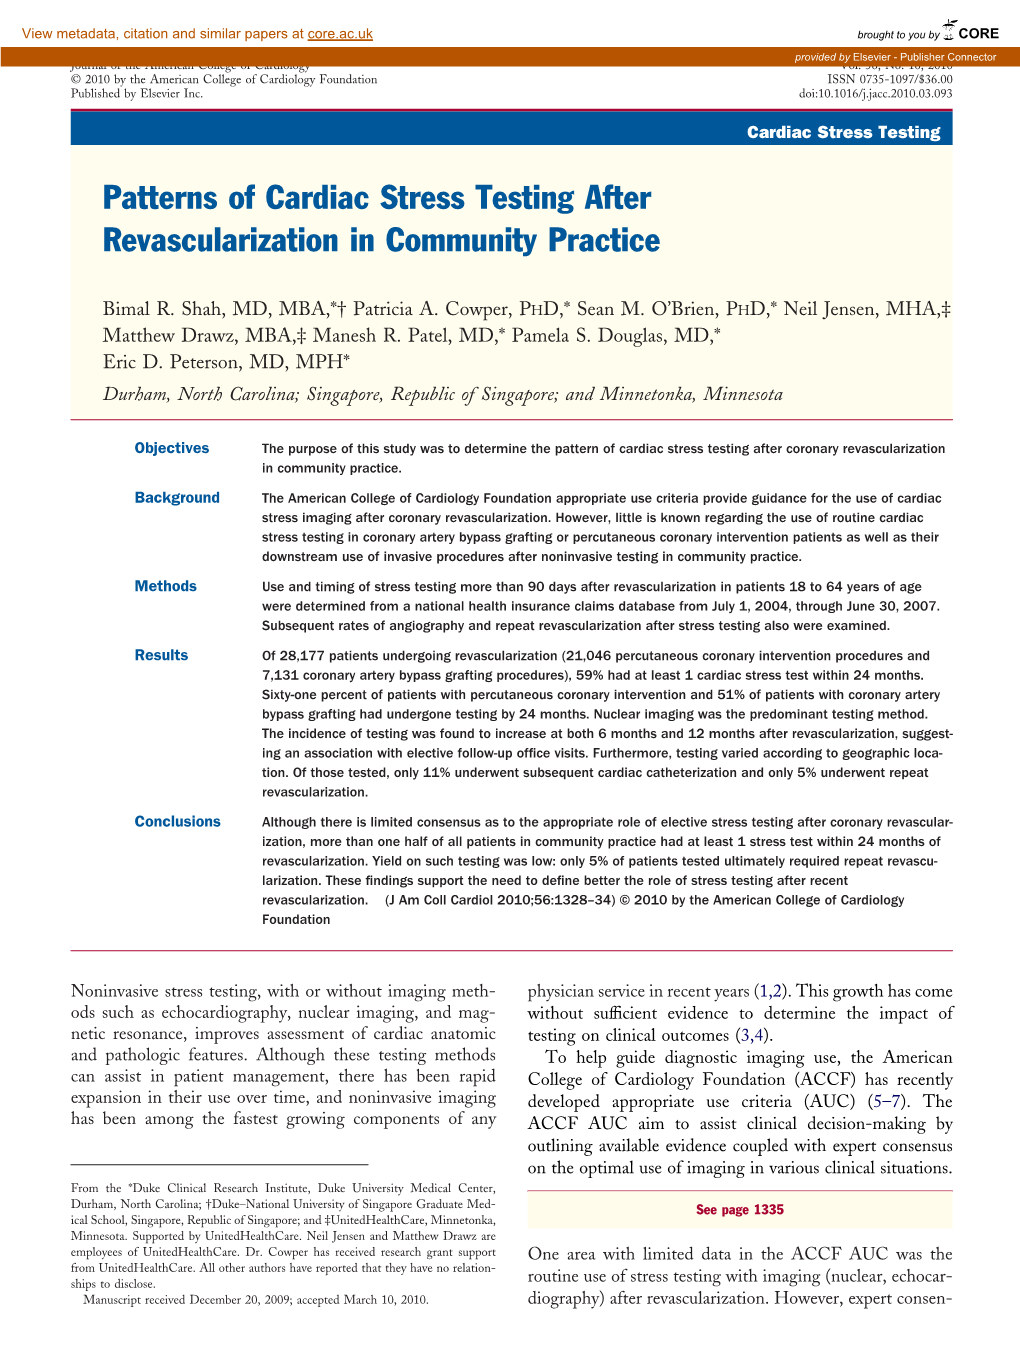 Patterns of Cardiac Stress Testing After Revascularization in Community Practice